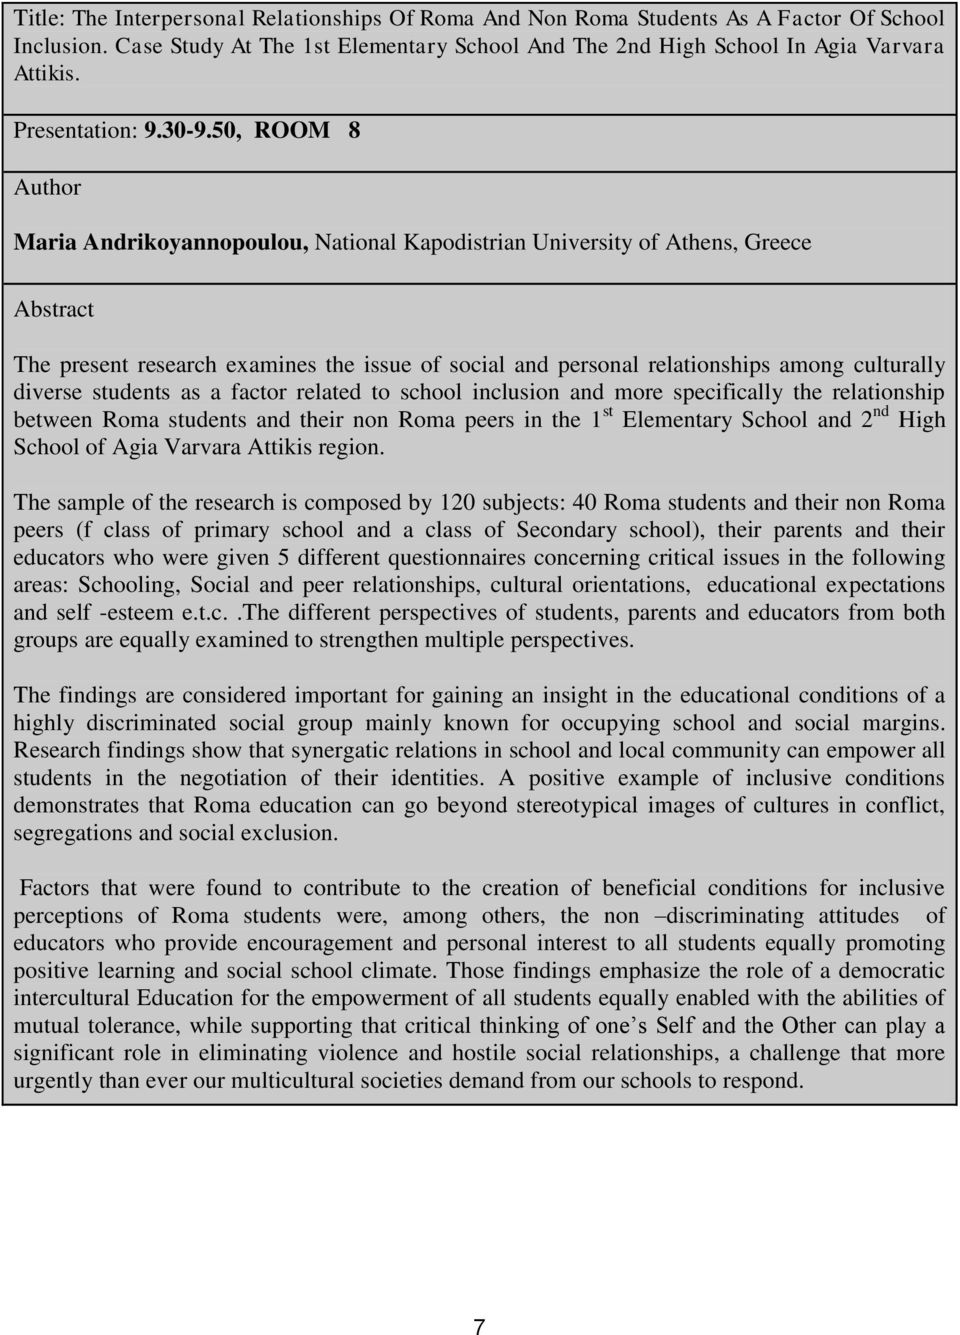 50, ROOM 8 Maria Andrikoyannopoulou, National Kapodistrian University of Athens, Greece The present research examines the issue of social and personal relationships among culturally diverse students